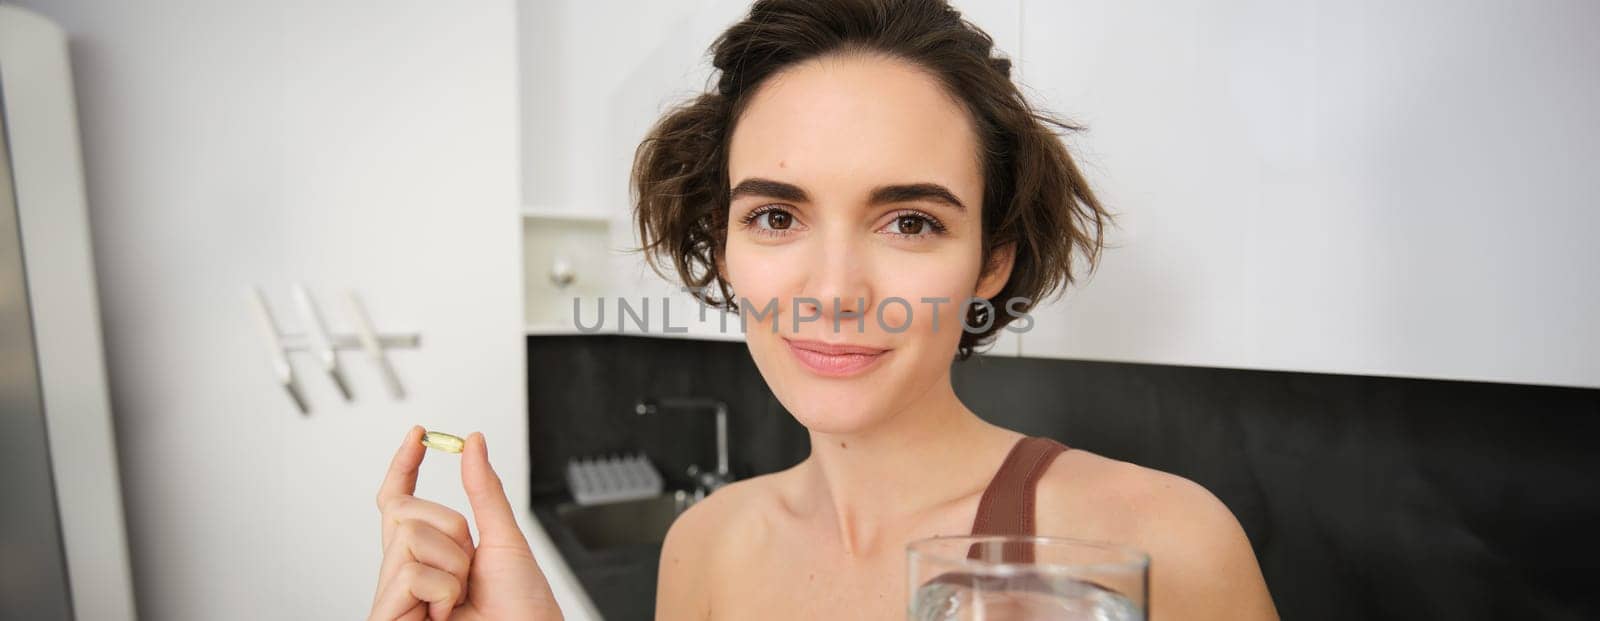 Portrait of sportswoman drinking water, taking vitamins, dietry supplements for healthy skin, having omega-3 pill, standing in her kitchen in workout clothing.